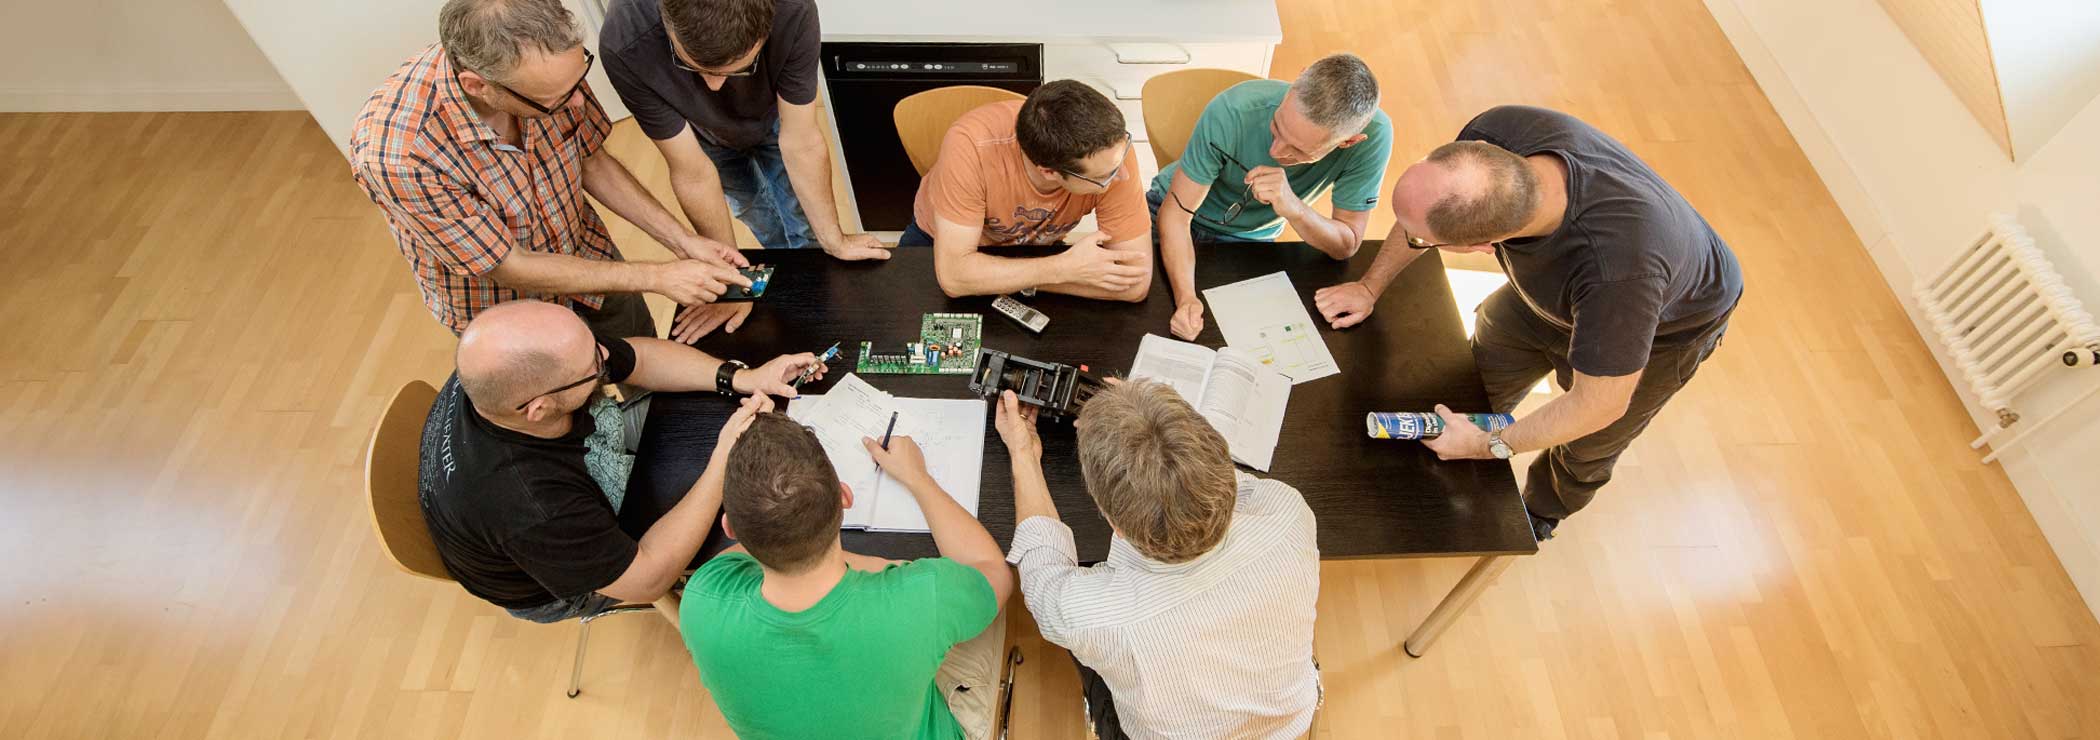 From above: engineers around table, discussing